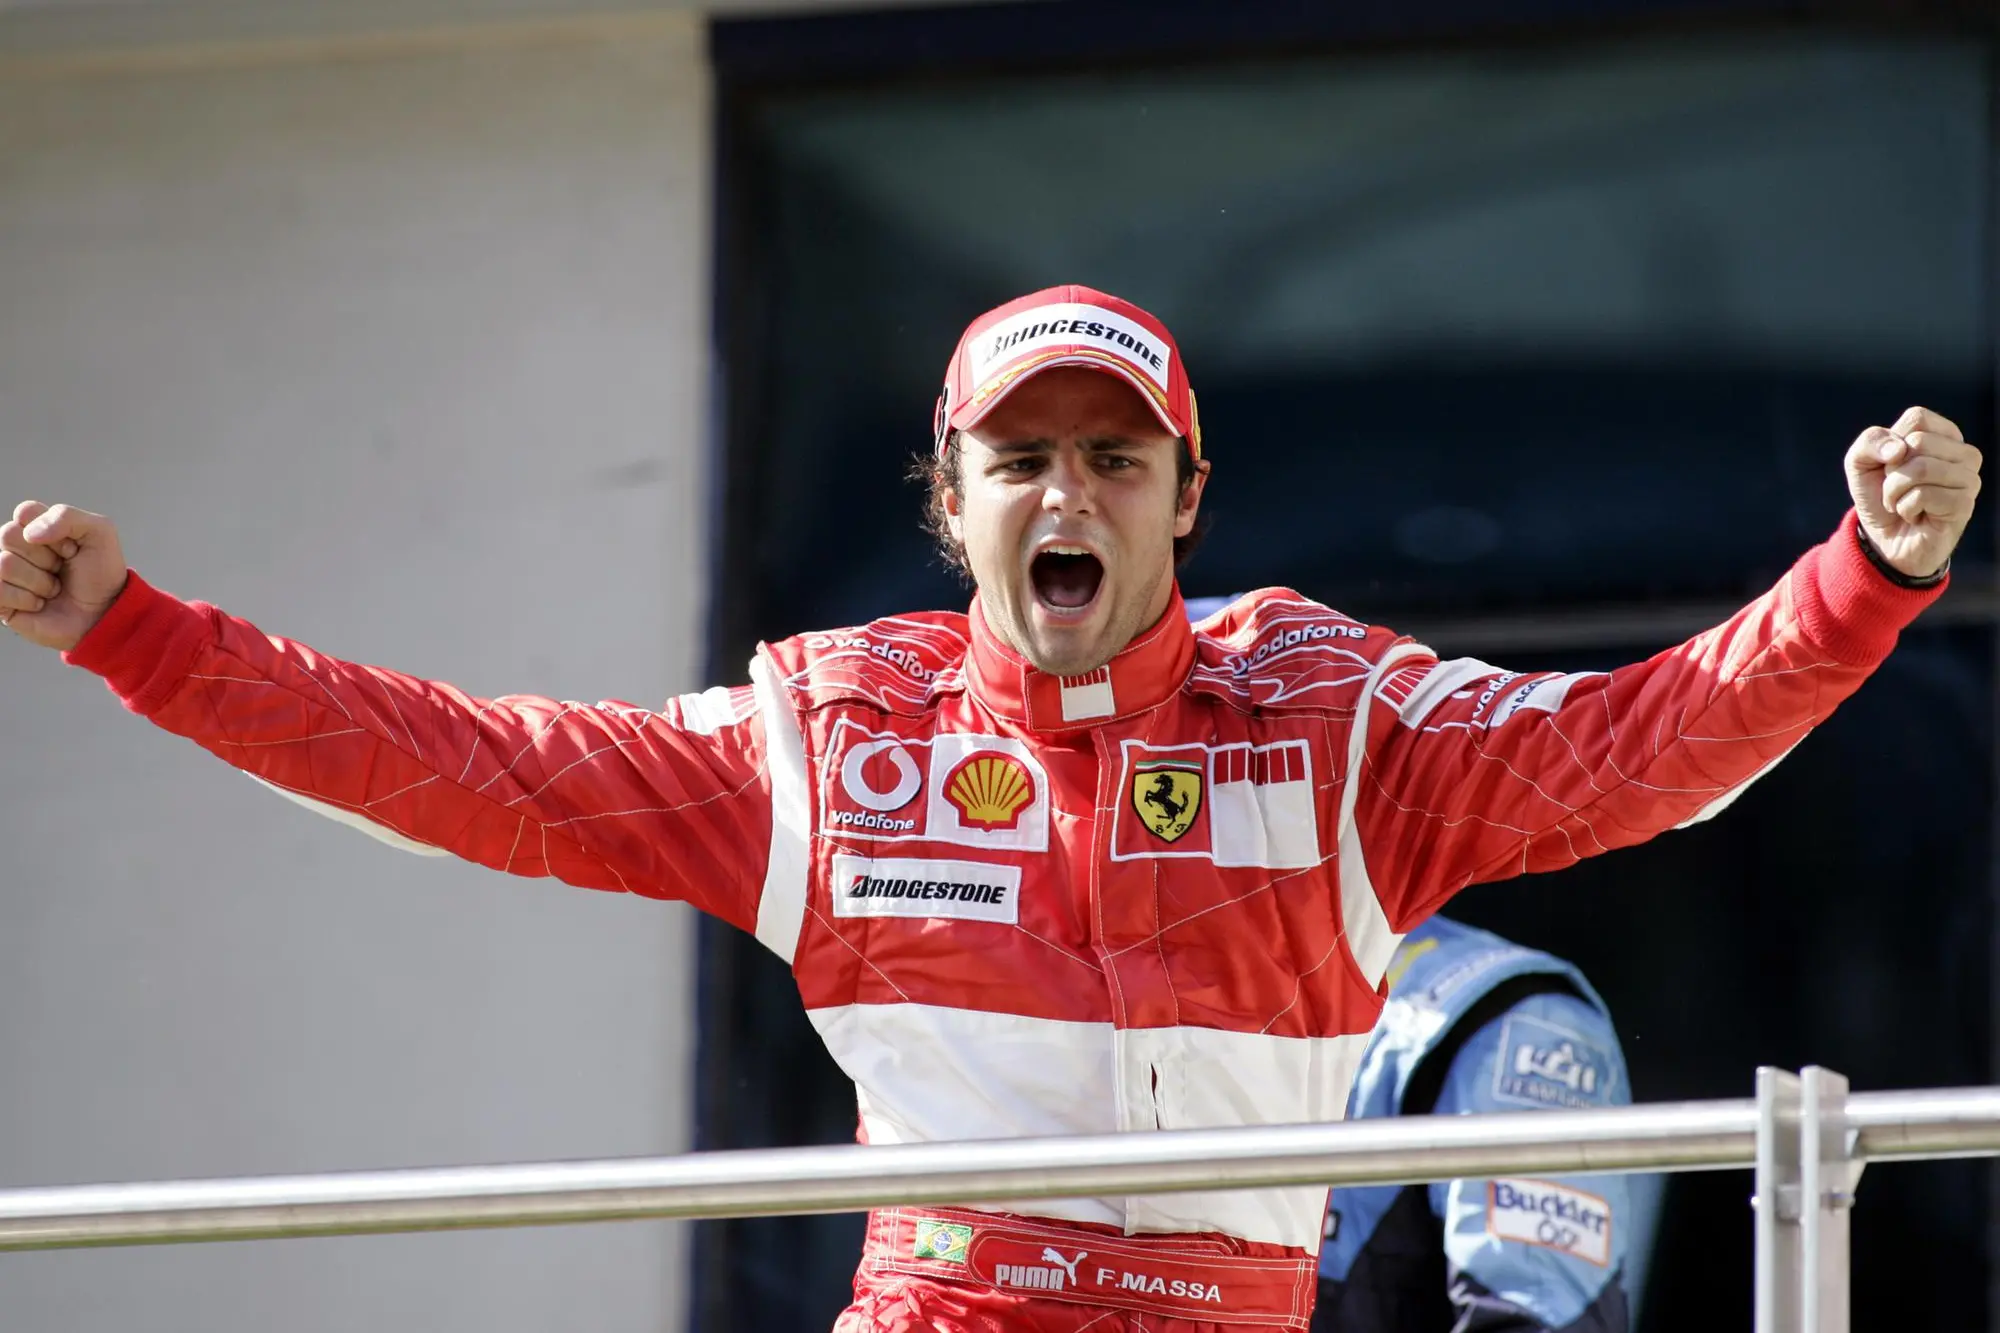 Ferrari Formula One driver Felipe Massa of Brazil celebrates on the podium after winning the Formula One Turkish Grand Prix at the Istanbul Park racing track in Istanbul, Turkey, Sunday, Aug. 27, 2006. Felipe Massa of Ferrari won the Turkish Grand Prix, his first Formula One victory after starting from the pole position. Renault's Fernando Alonso held off Ferrari's Michael Schumacher in a thrilling duel over the last 13 laps to take second and increase his lead slightly over the German in the season standings. (AP Photo/Murad Sezer)